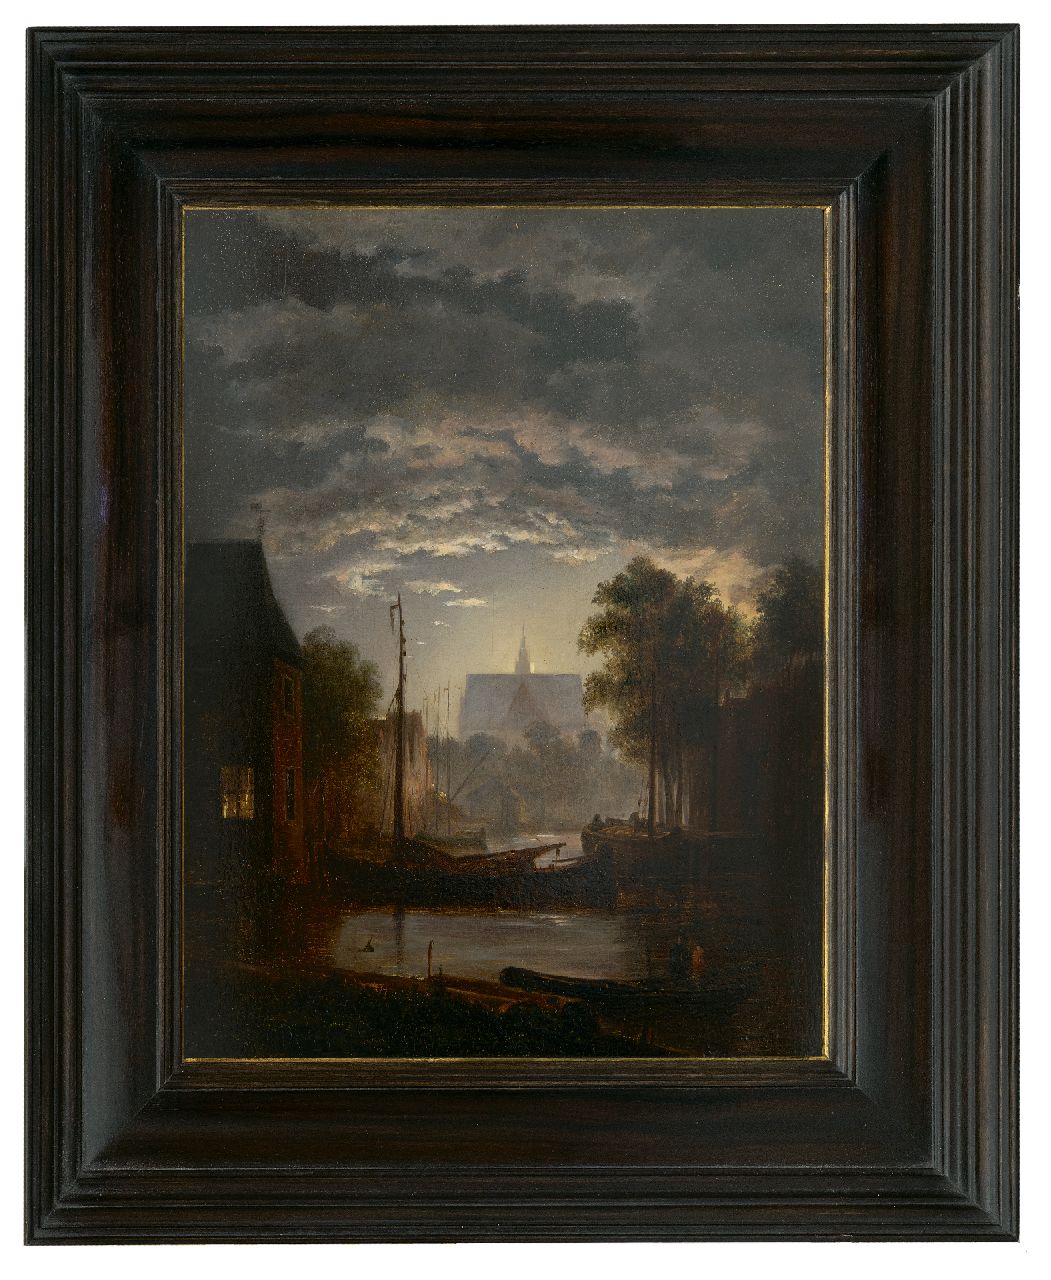 Abels J.Th.  | 'Jacobus' Theodorus Abels | Paintings offered for sale | A moonlit town harbour, oil on panel 29.7 x 23.6 cm